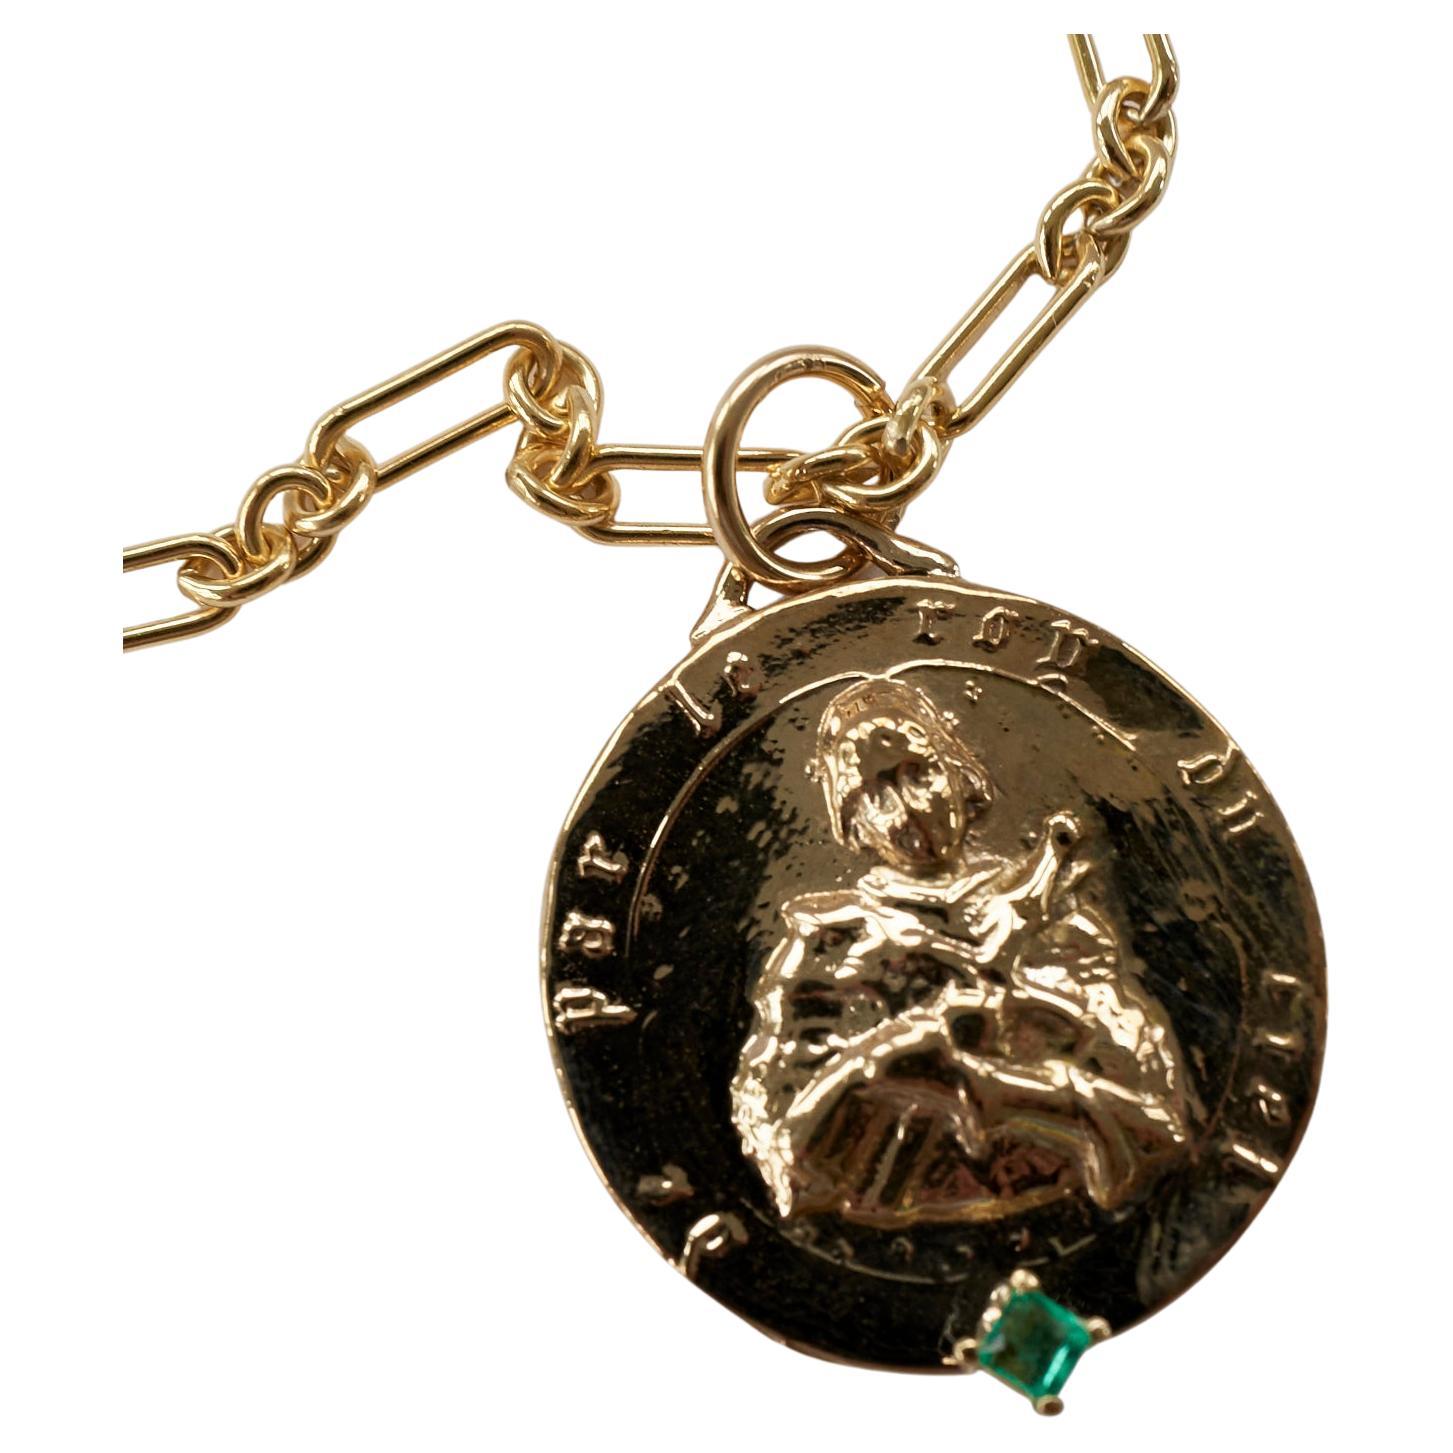 Squared Emerald Set in Prong Gold Filled Chain Necklace Medal Coin Pendant Gold Vermeil Joan Of Arc By J Dauphin  28